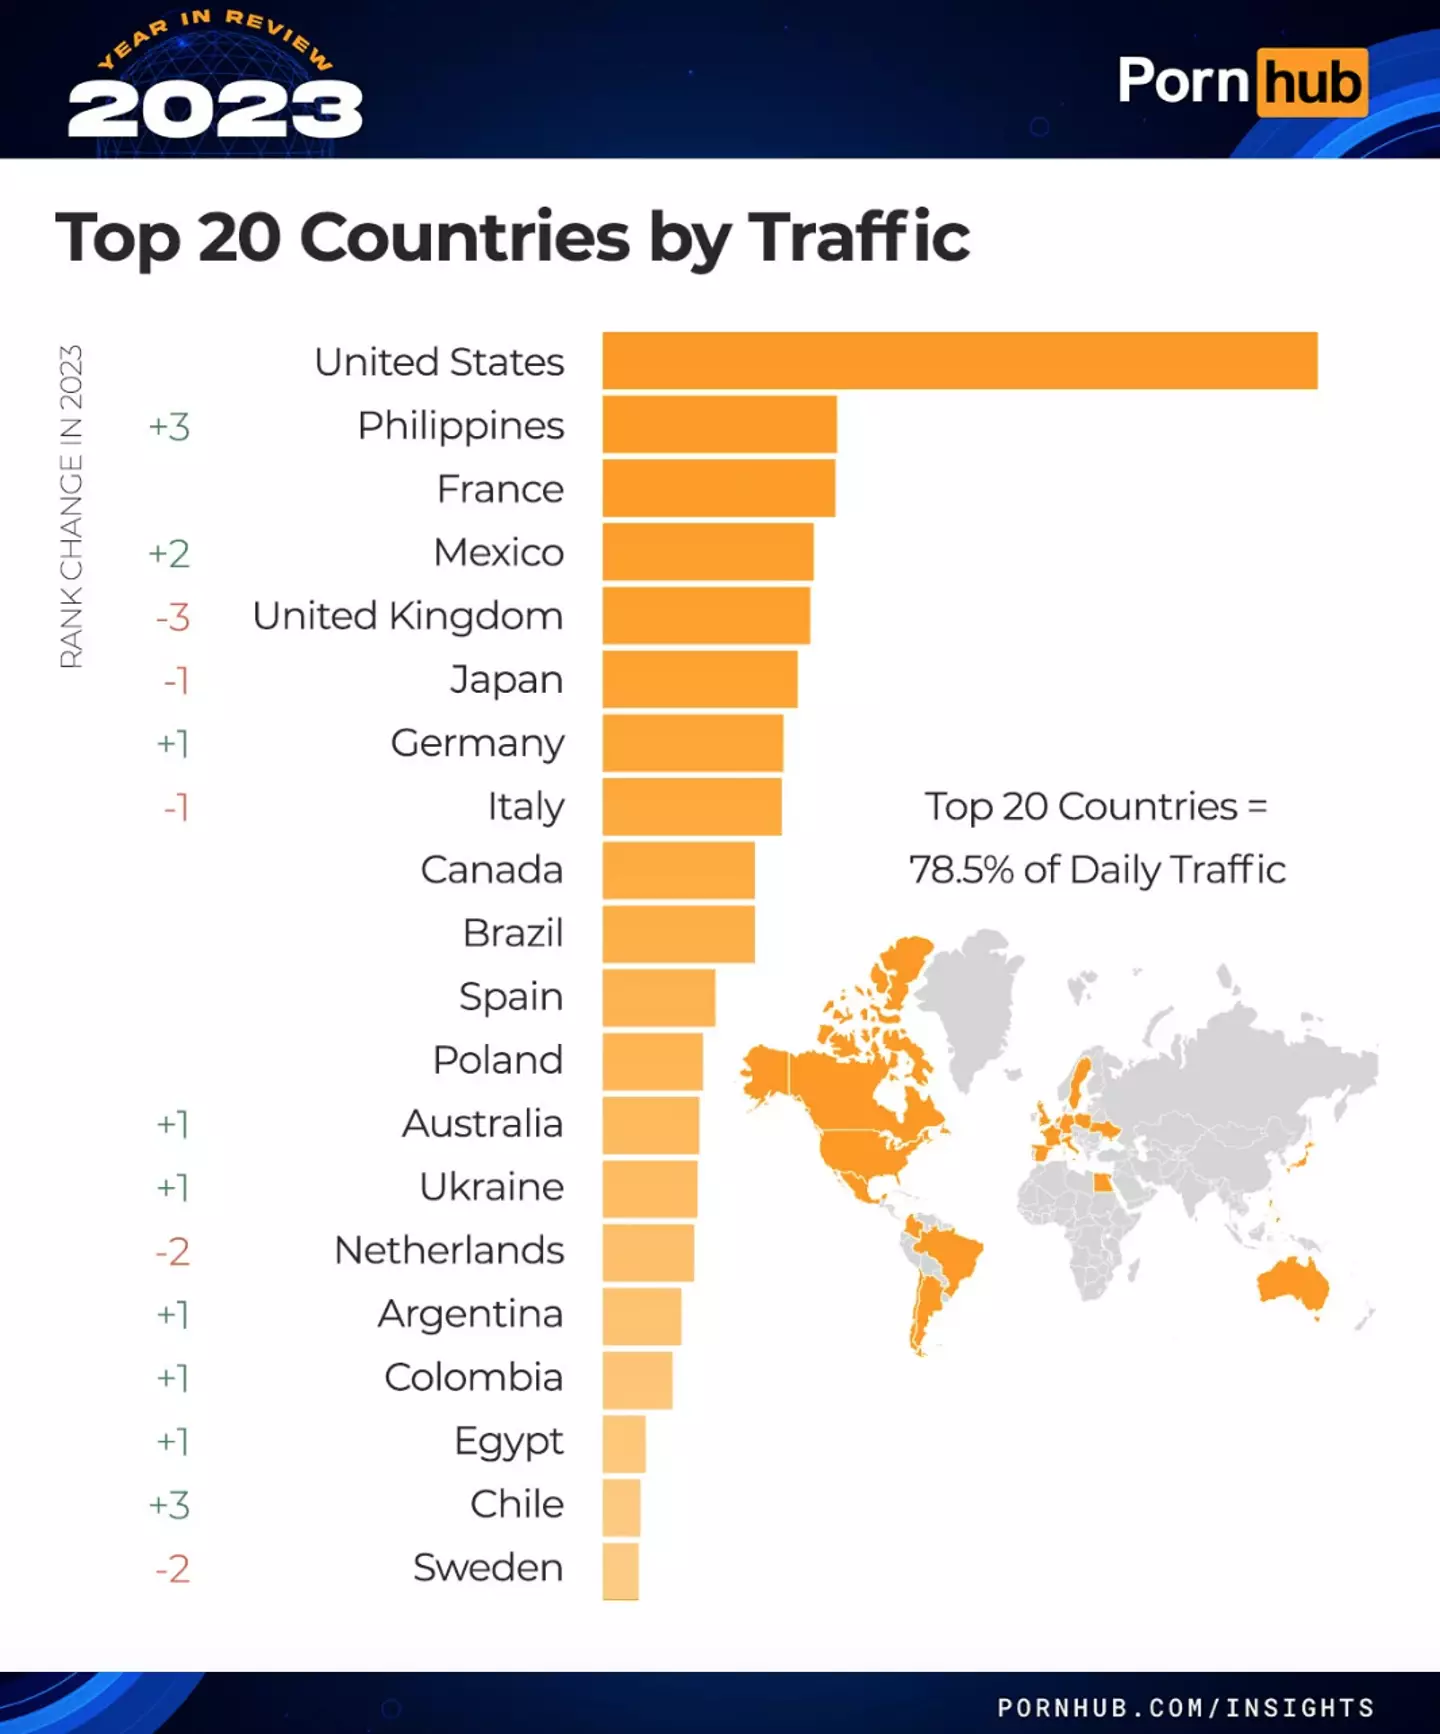 Data revealed that the top 20 countries for daily traffic made up 78.5% of the website's viewership.